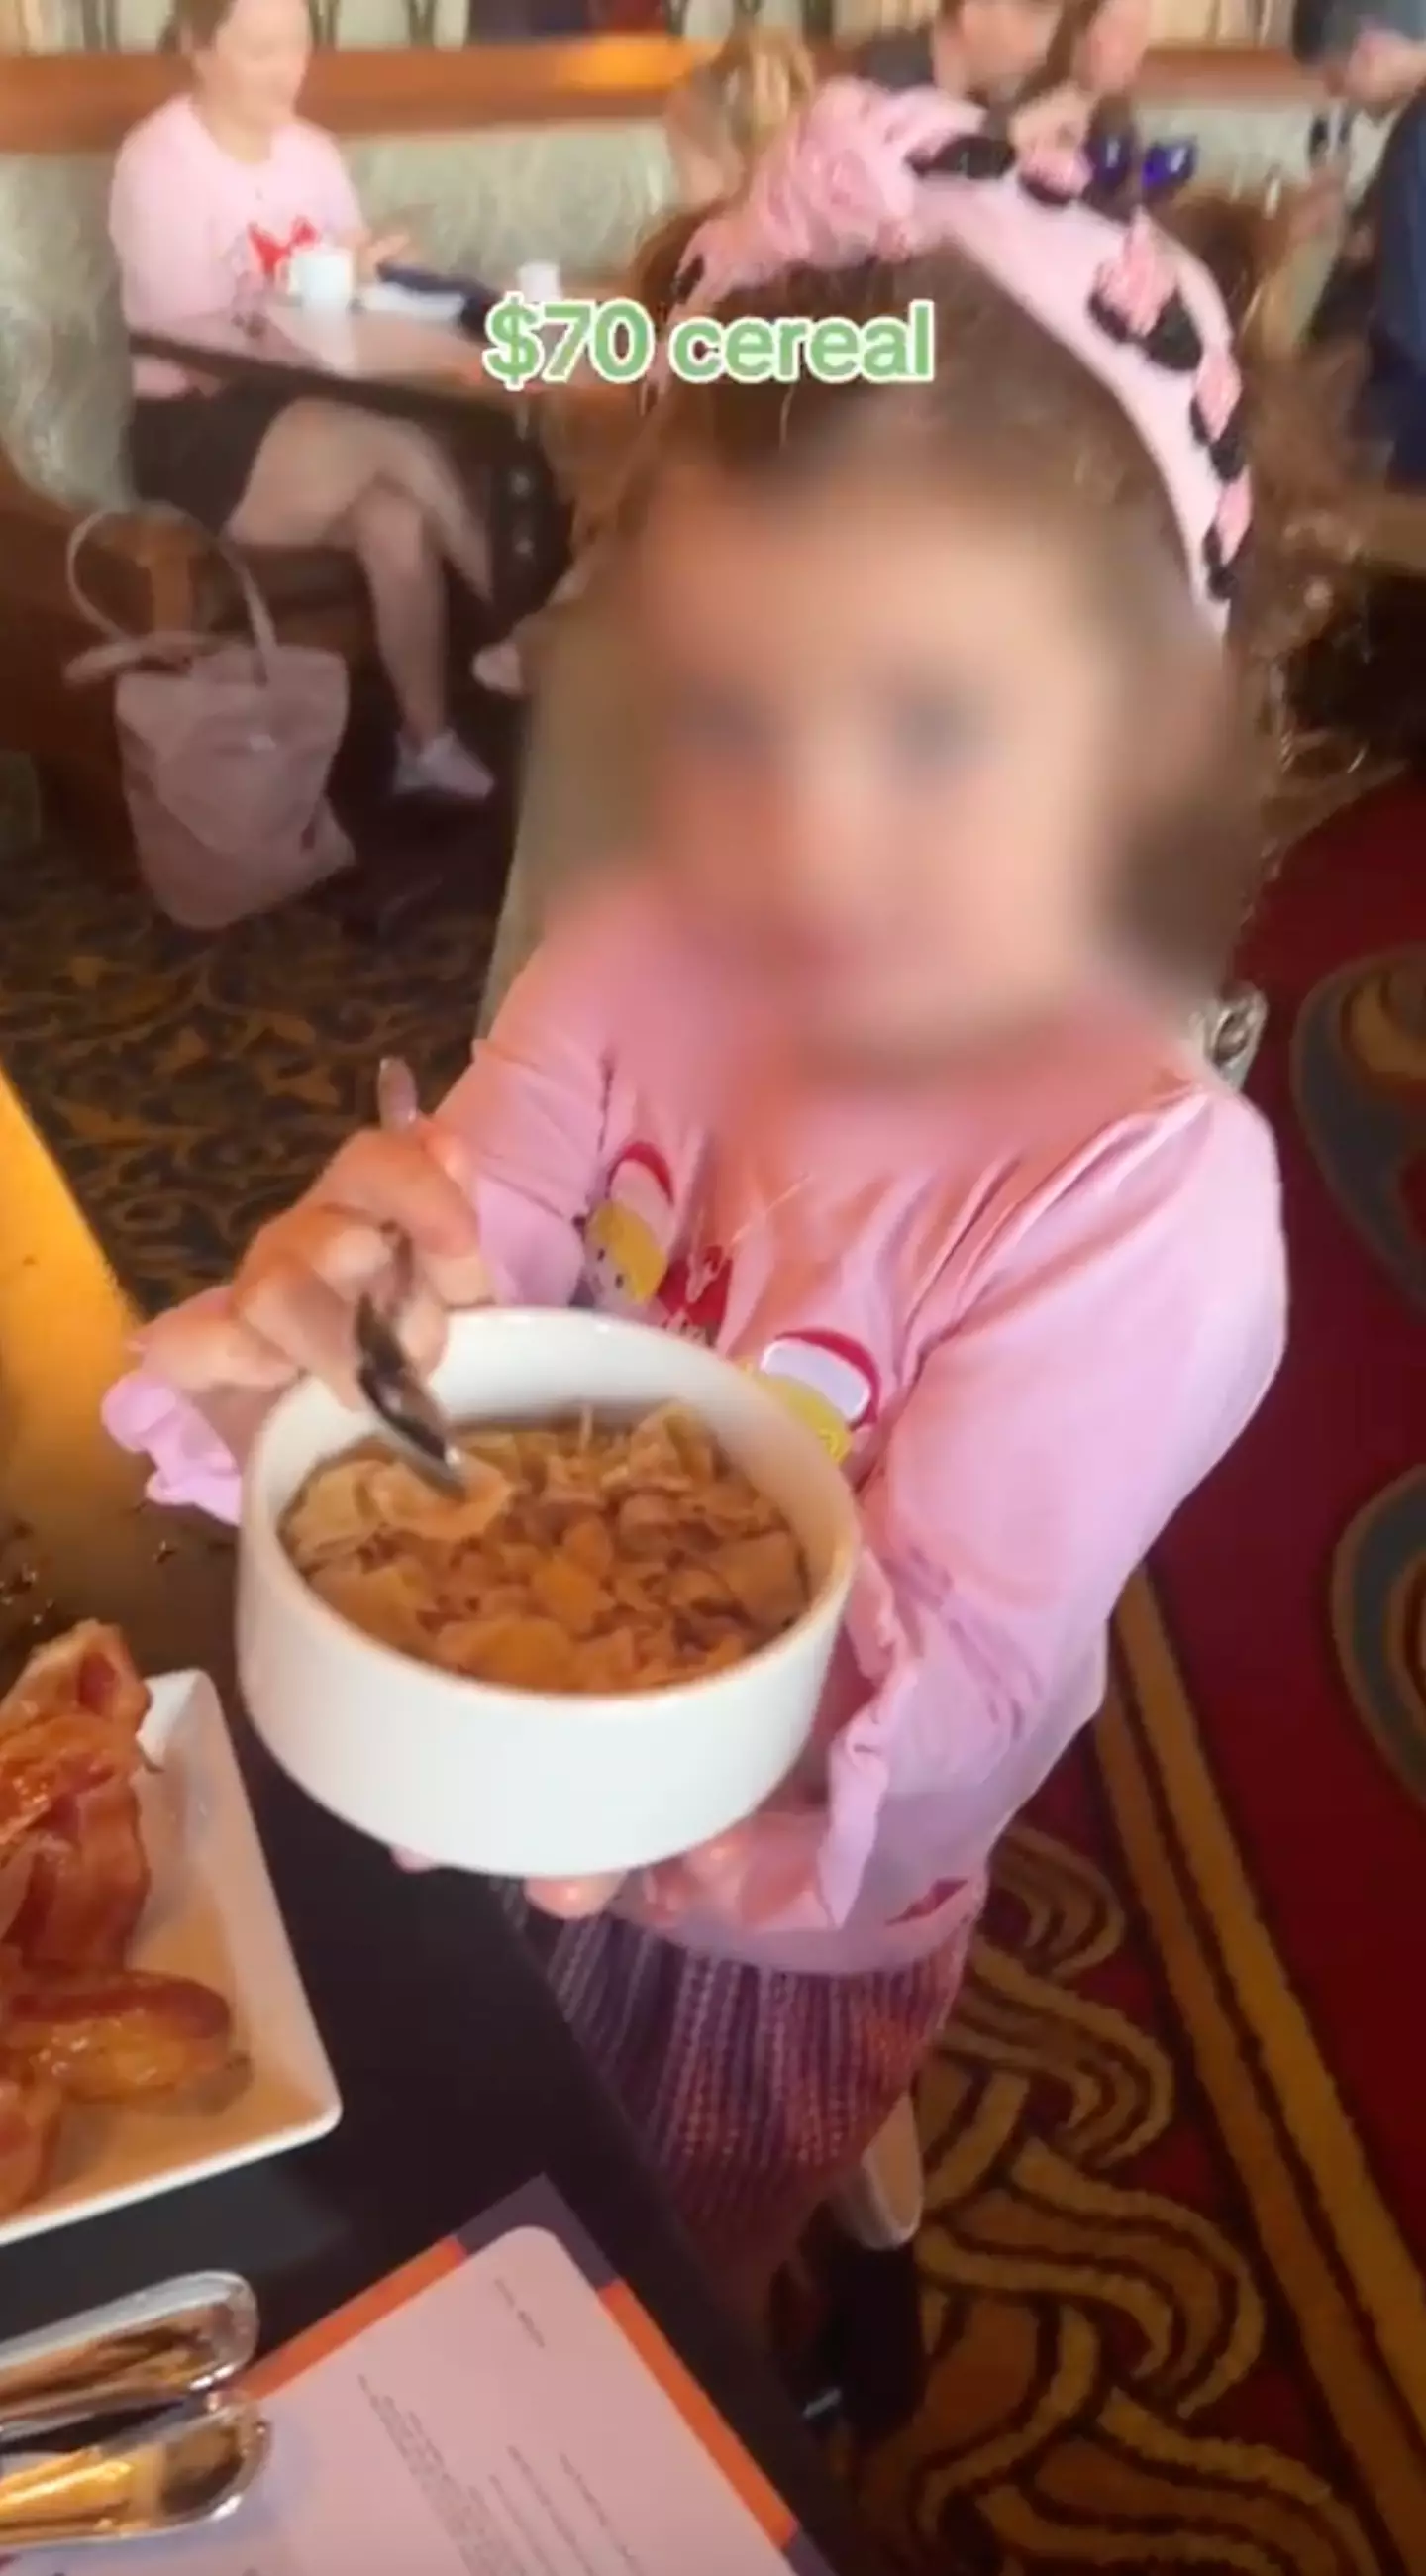 One mum was stunned by the '$70 cereal' at Disney World.